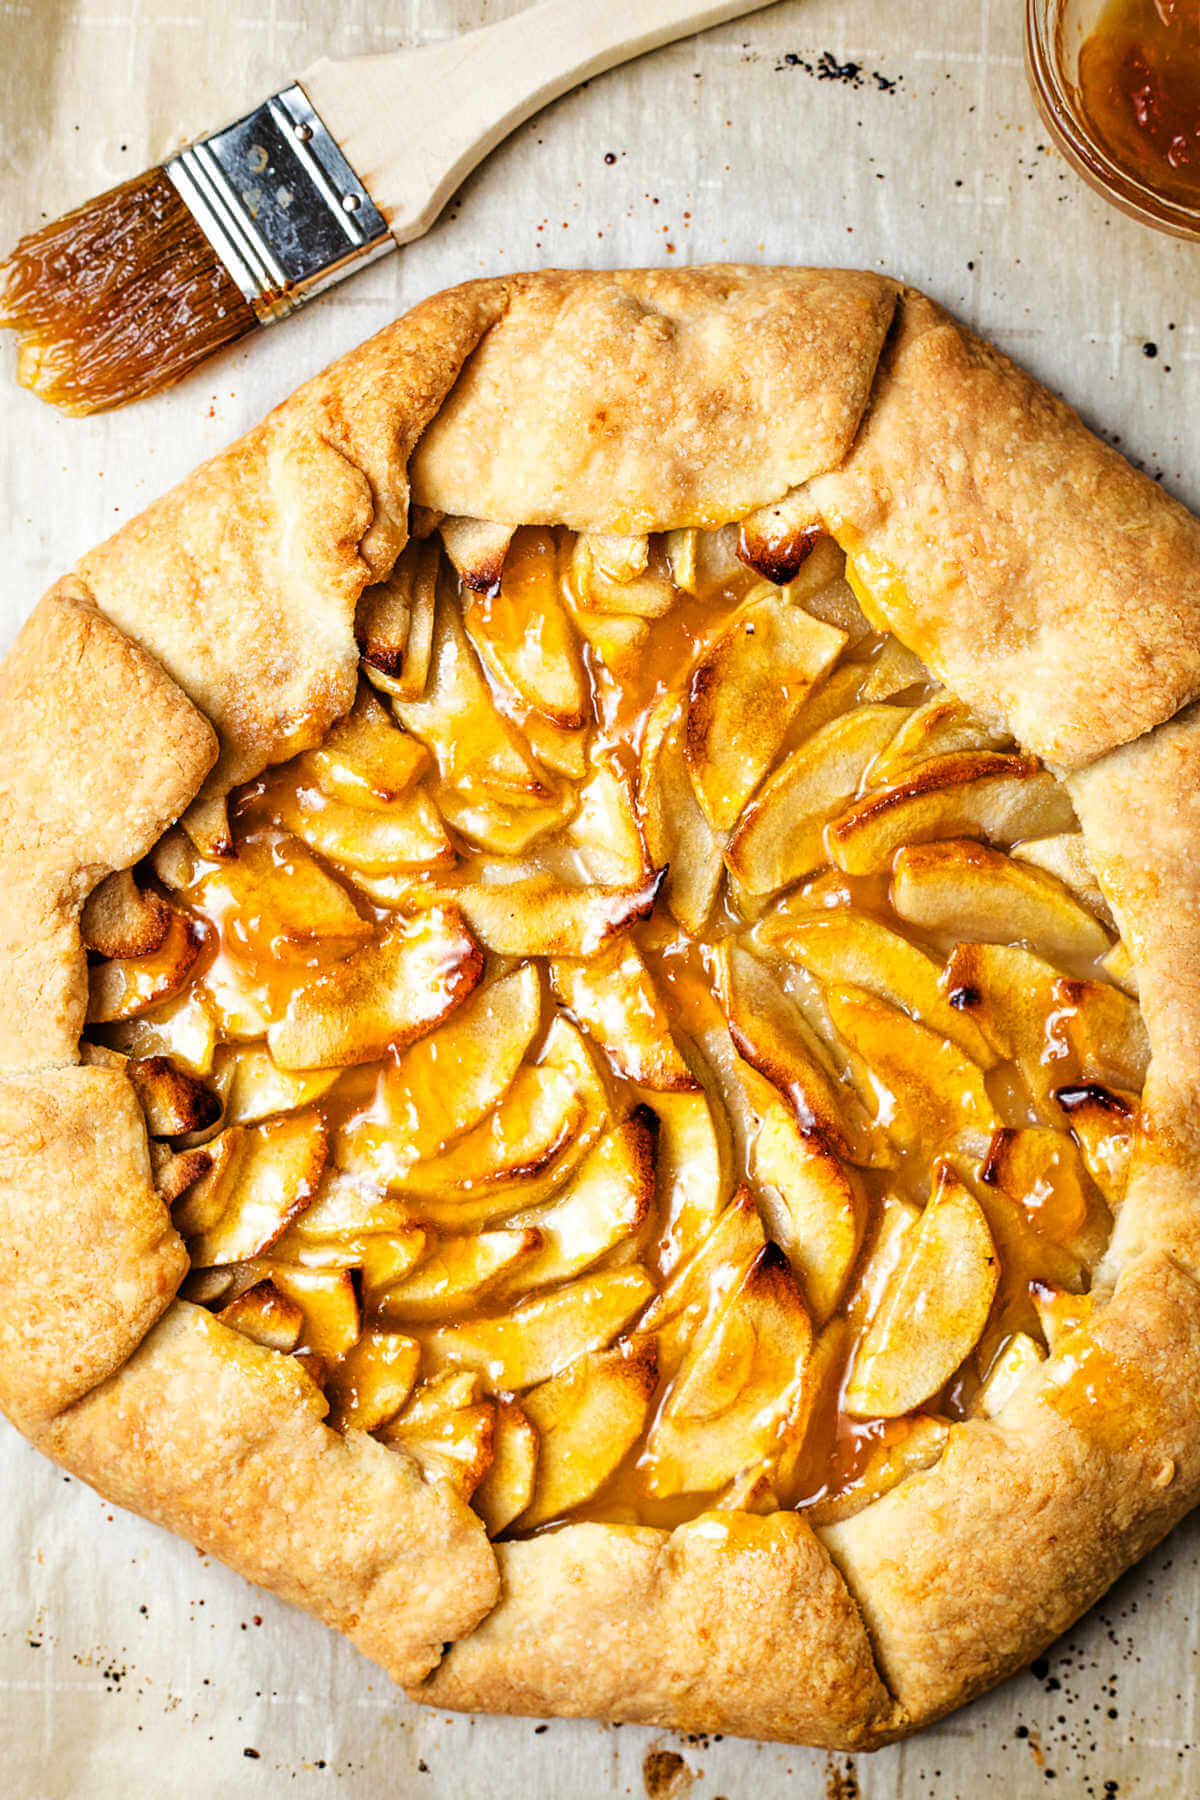 an apple tart glazed with melted apricot jam.